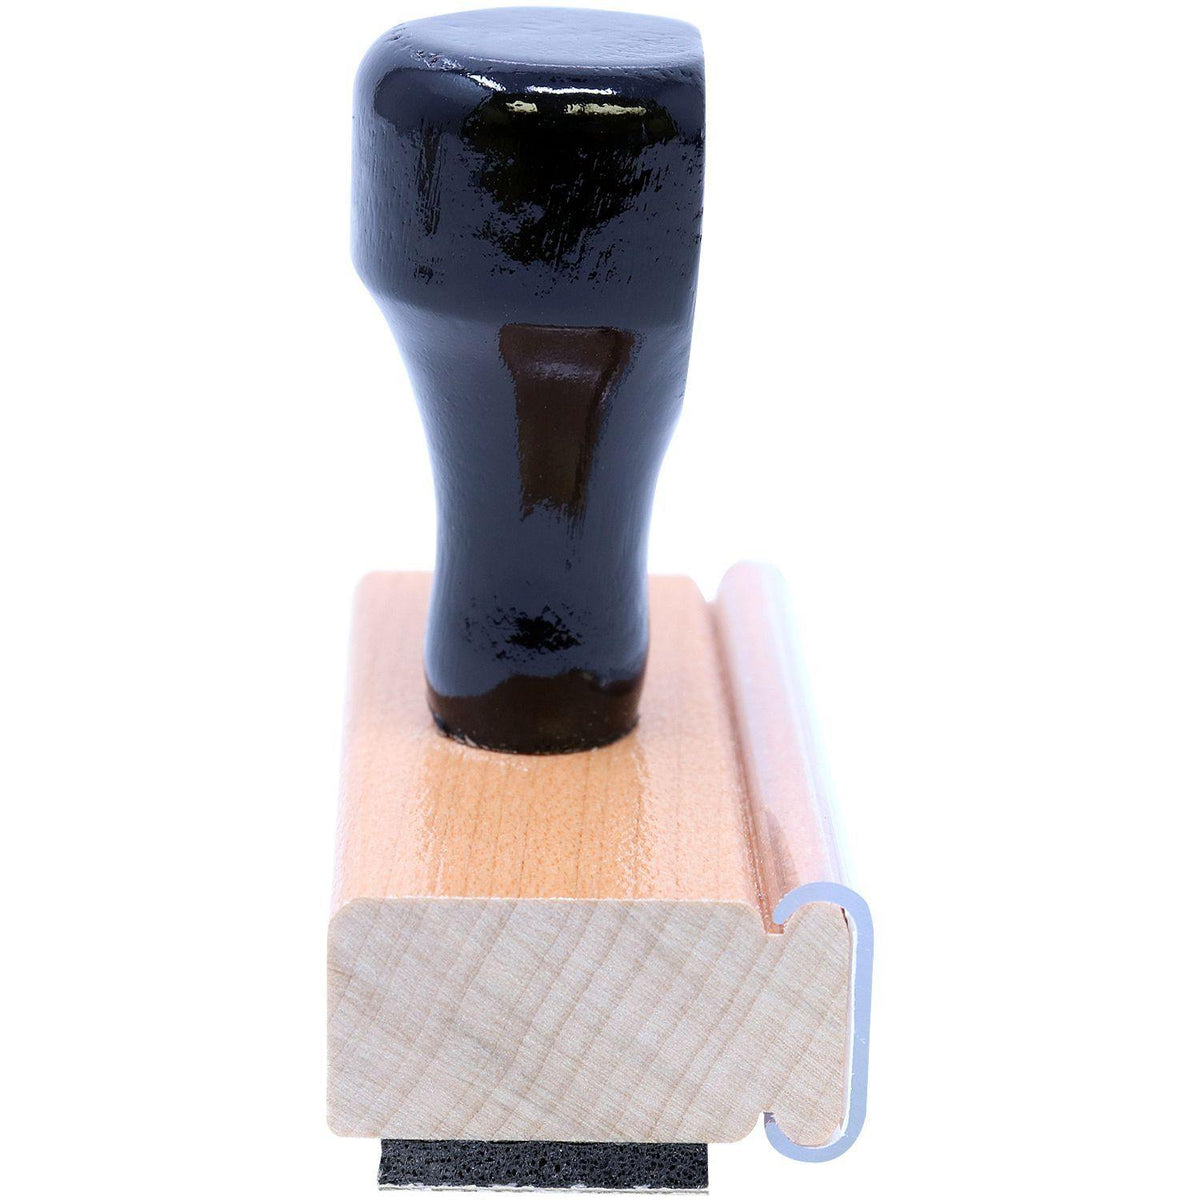 Outline Anulado Rubber Stamp - Engineer Seal Stamps - Brand_Acorn, Impression Size_Small, Stamp Type_Regular Stamp, Type of Use_Business, Type of Use_Finance, Type of Use_Office, Type of Use_Professional